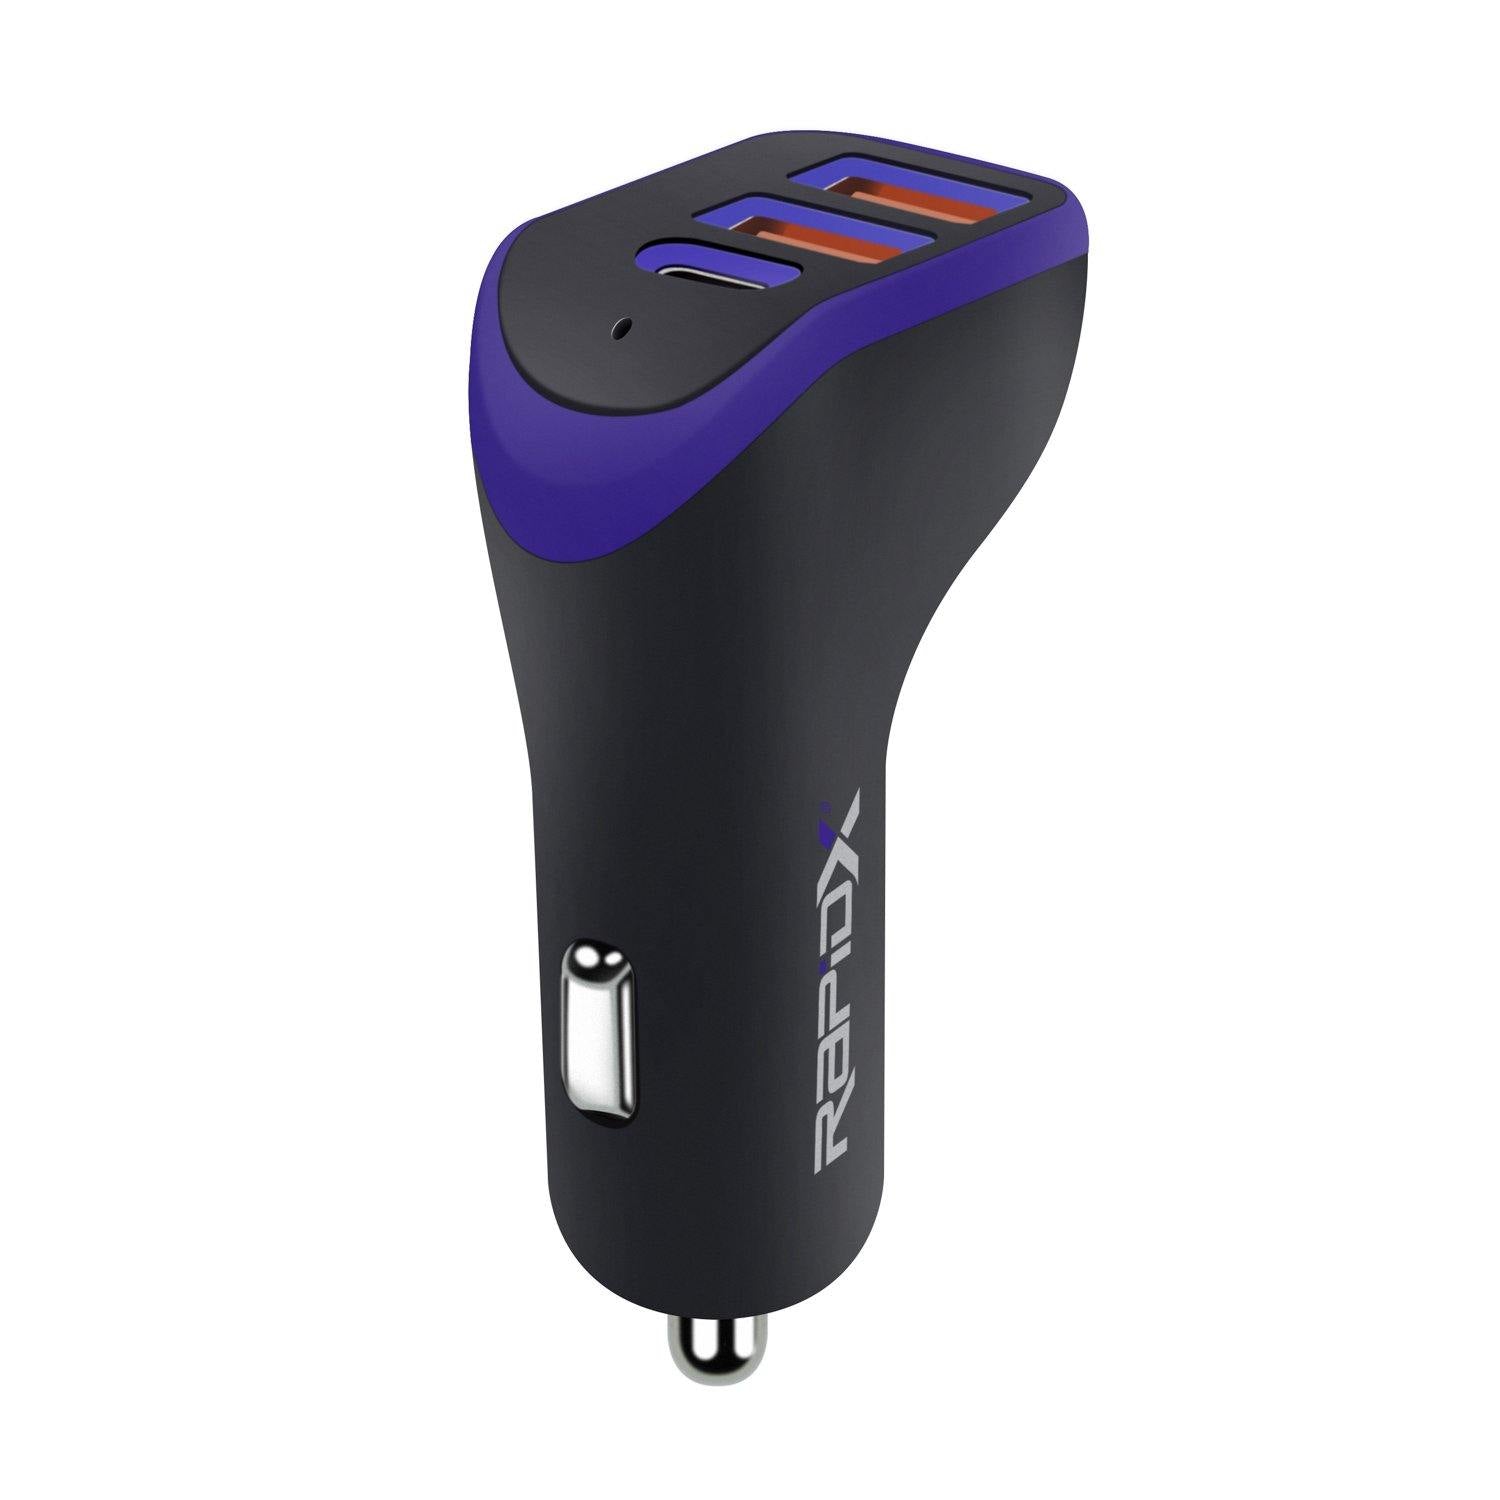 X3PD Compact & Fast Car Charger for 3 Devices 35W Total - RapidX